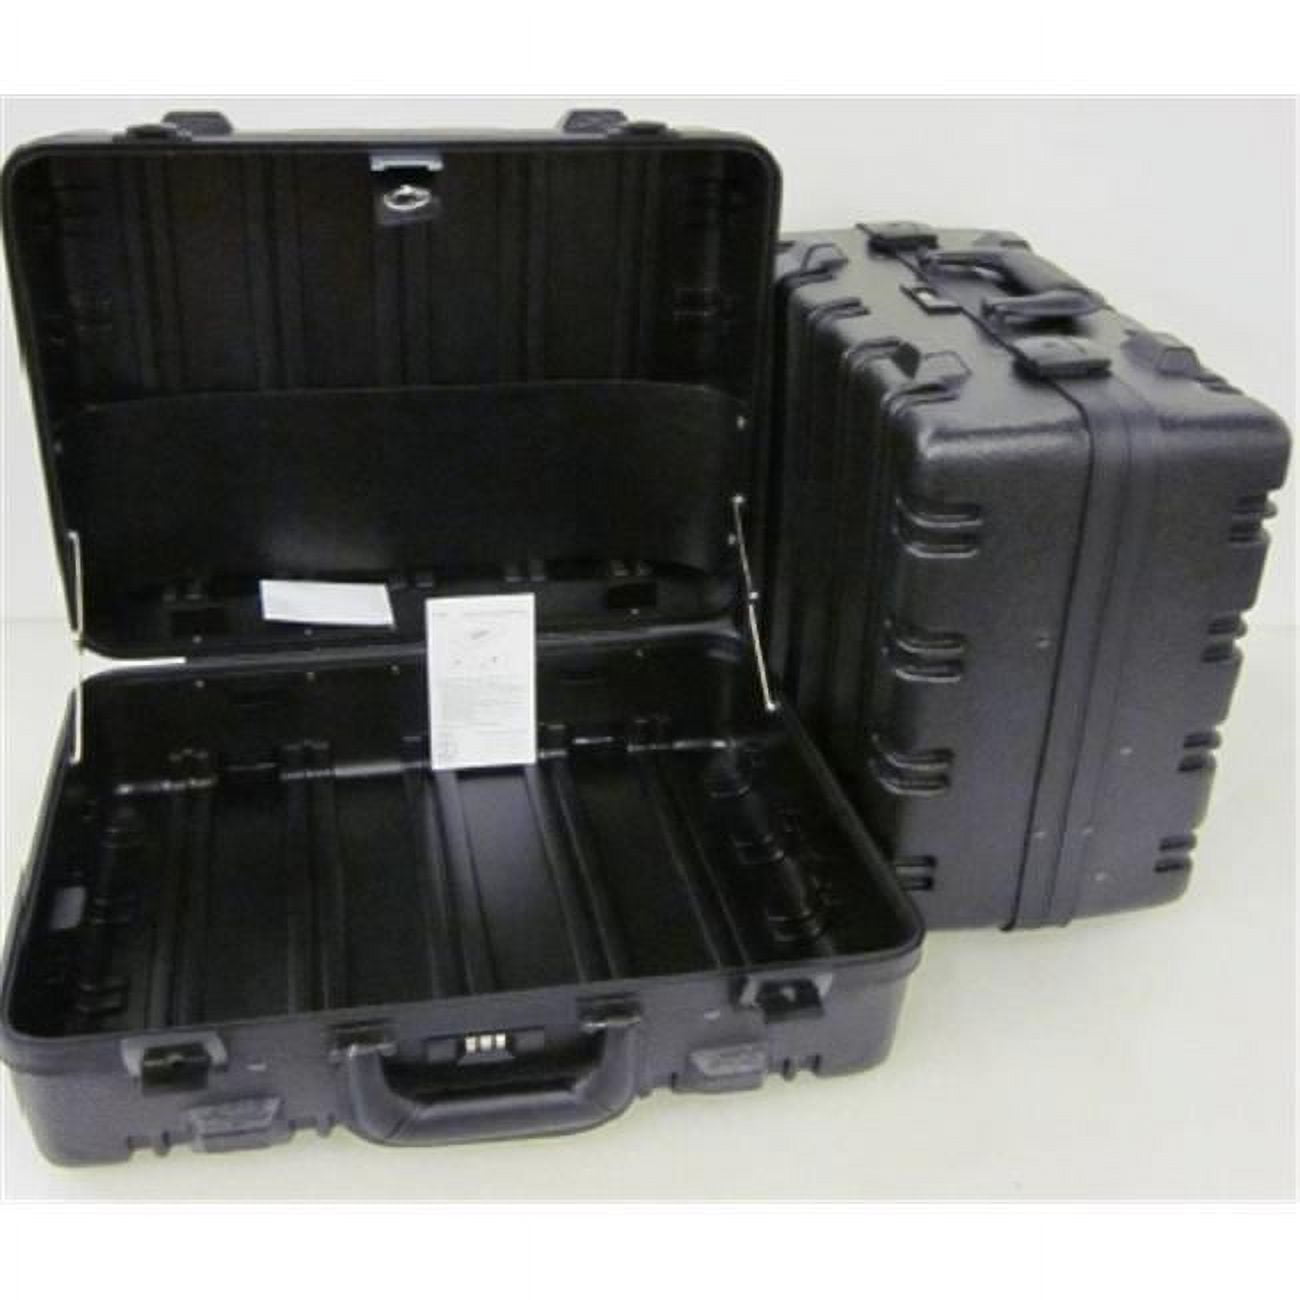 95-8748 Empty Tool Carrying Case With Pallet Hardware - Black